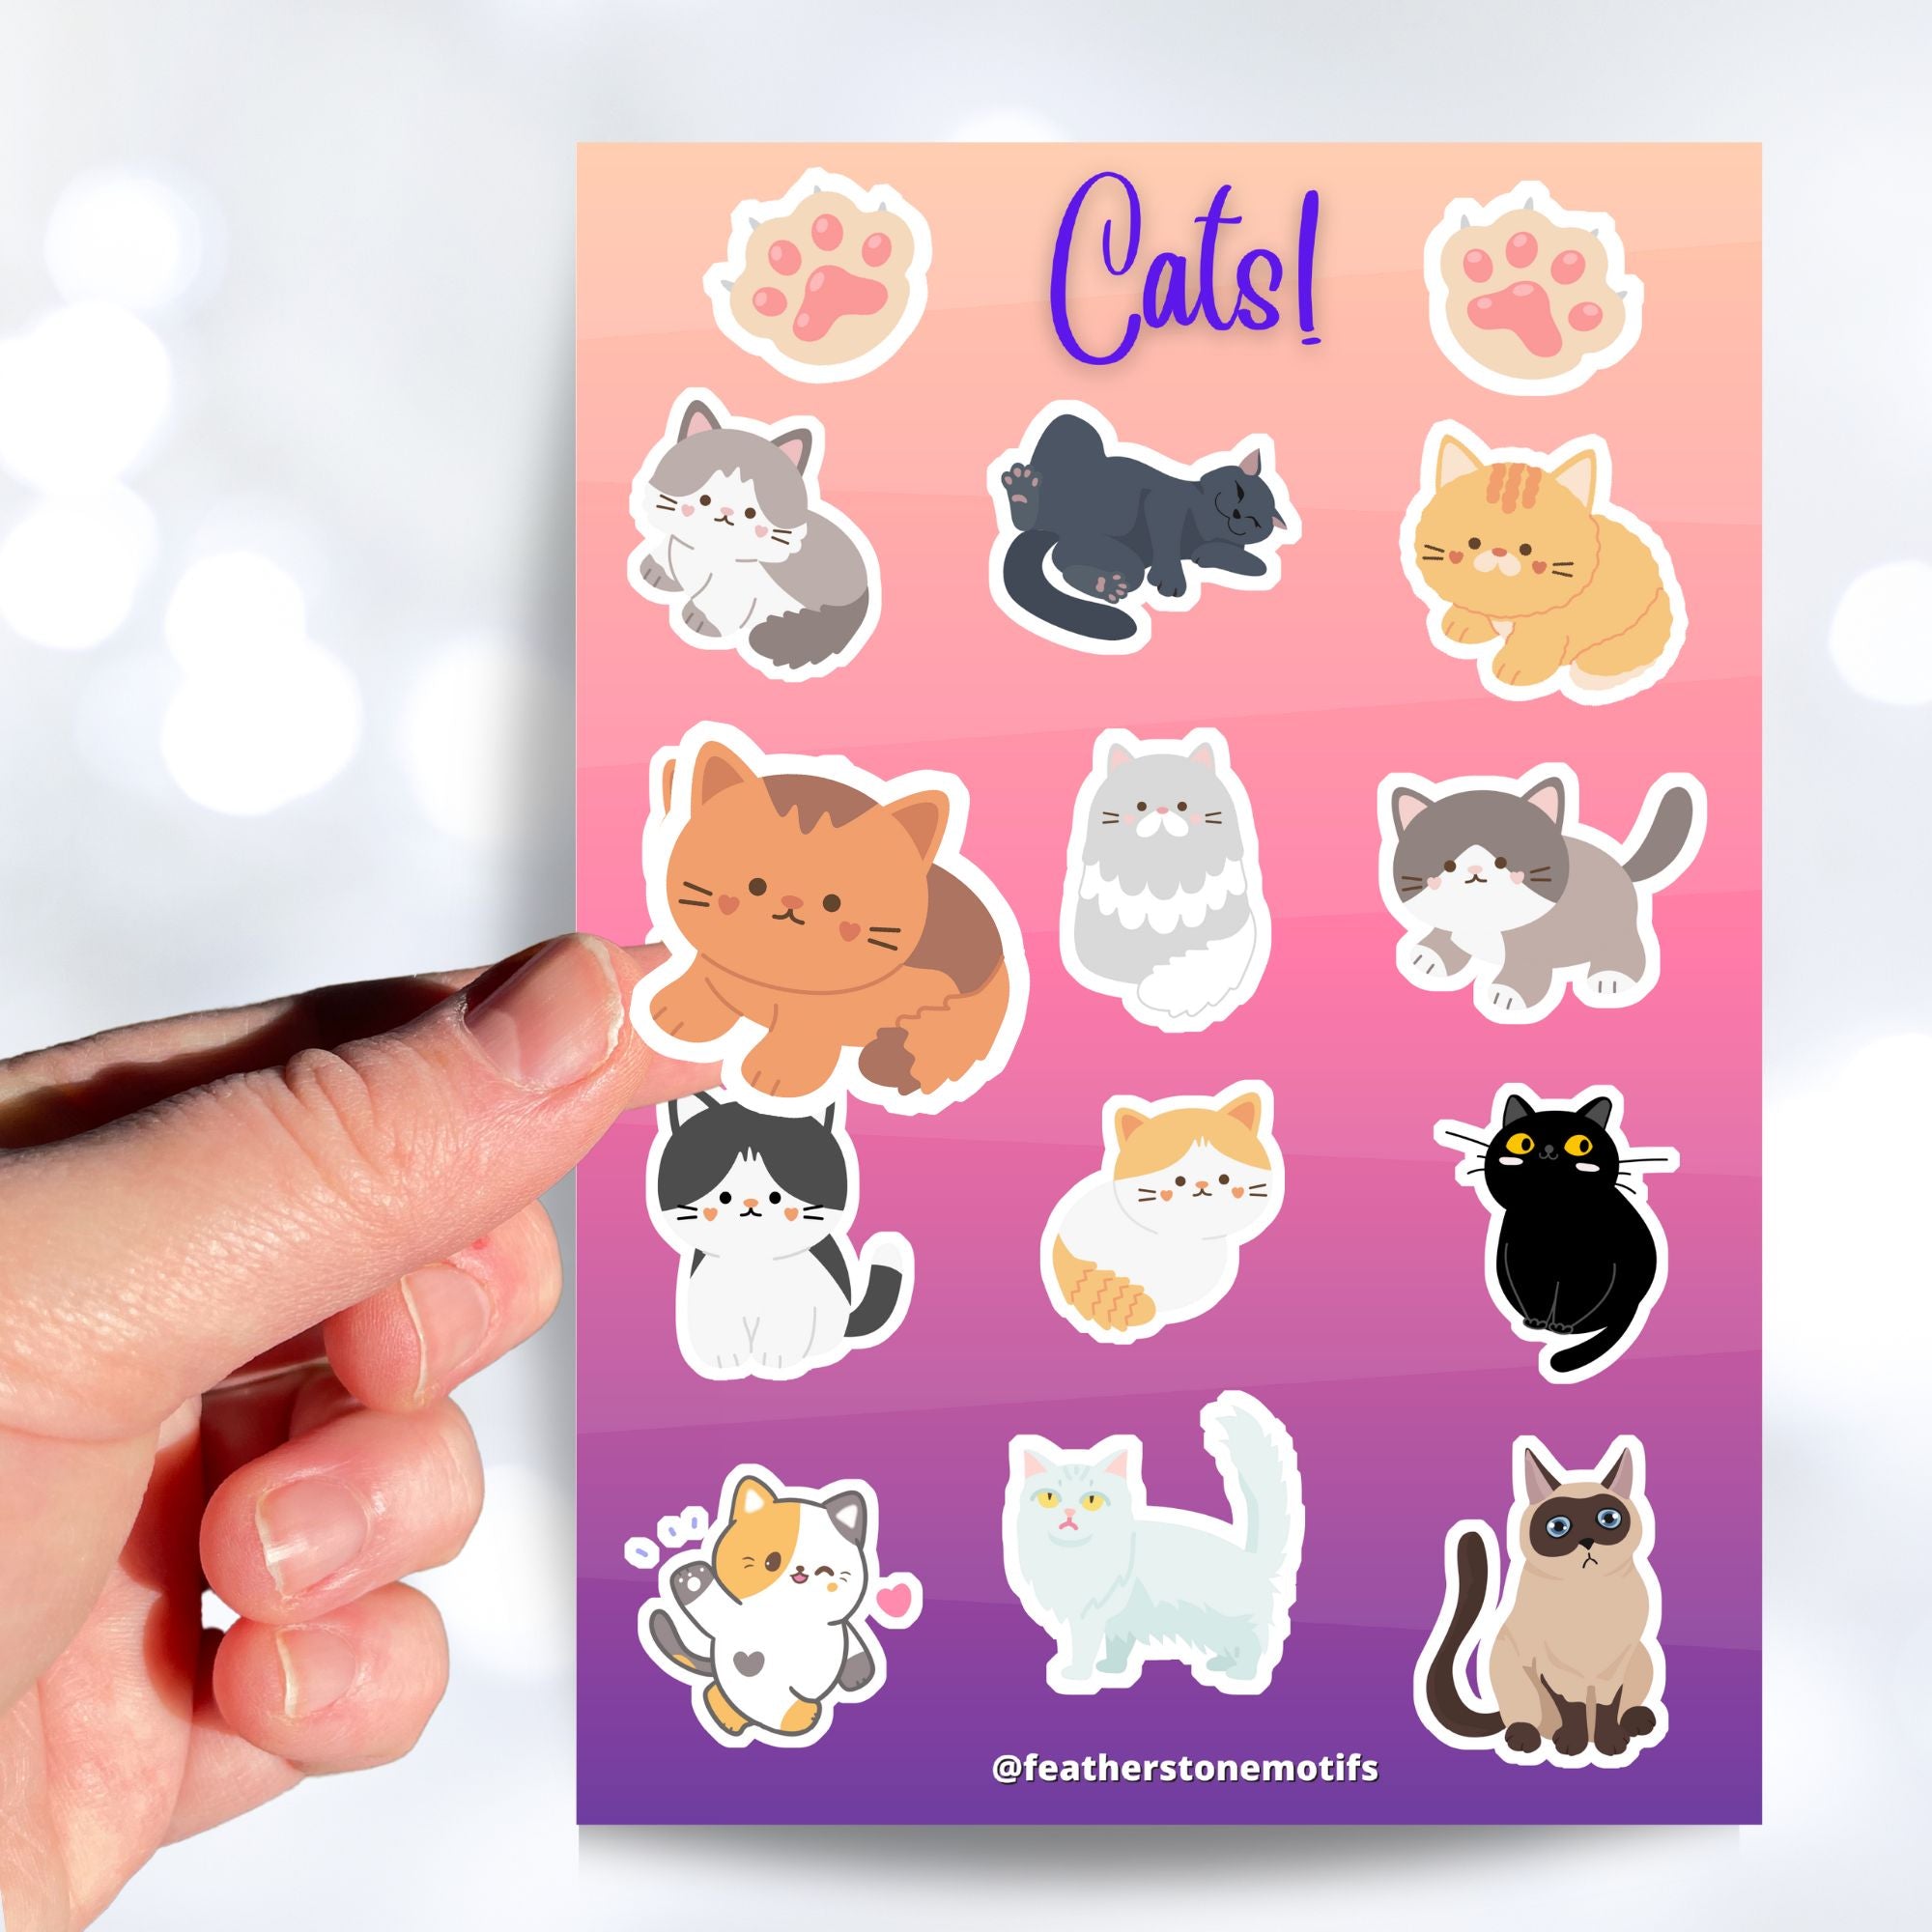 This sticker sheet is purrfect for all cat lovers! It has stickers of 12 different cute and cuddly cats, plus two pawprint stickers.  This image shows a hand holding a brown cat sticker above the full sticker sheet.